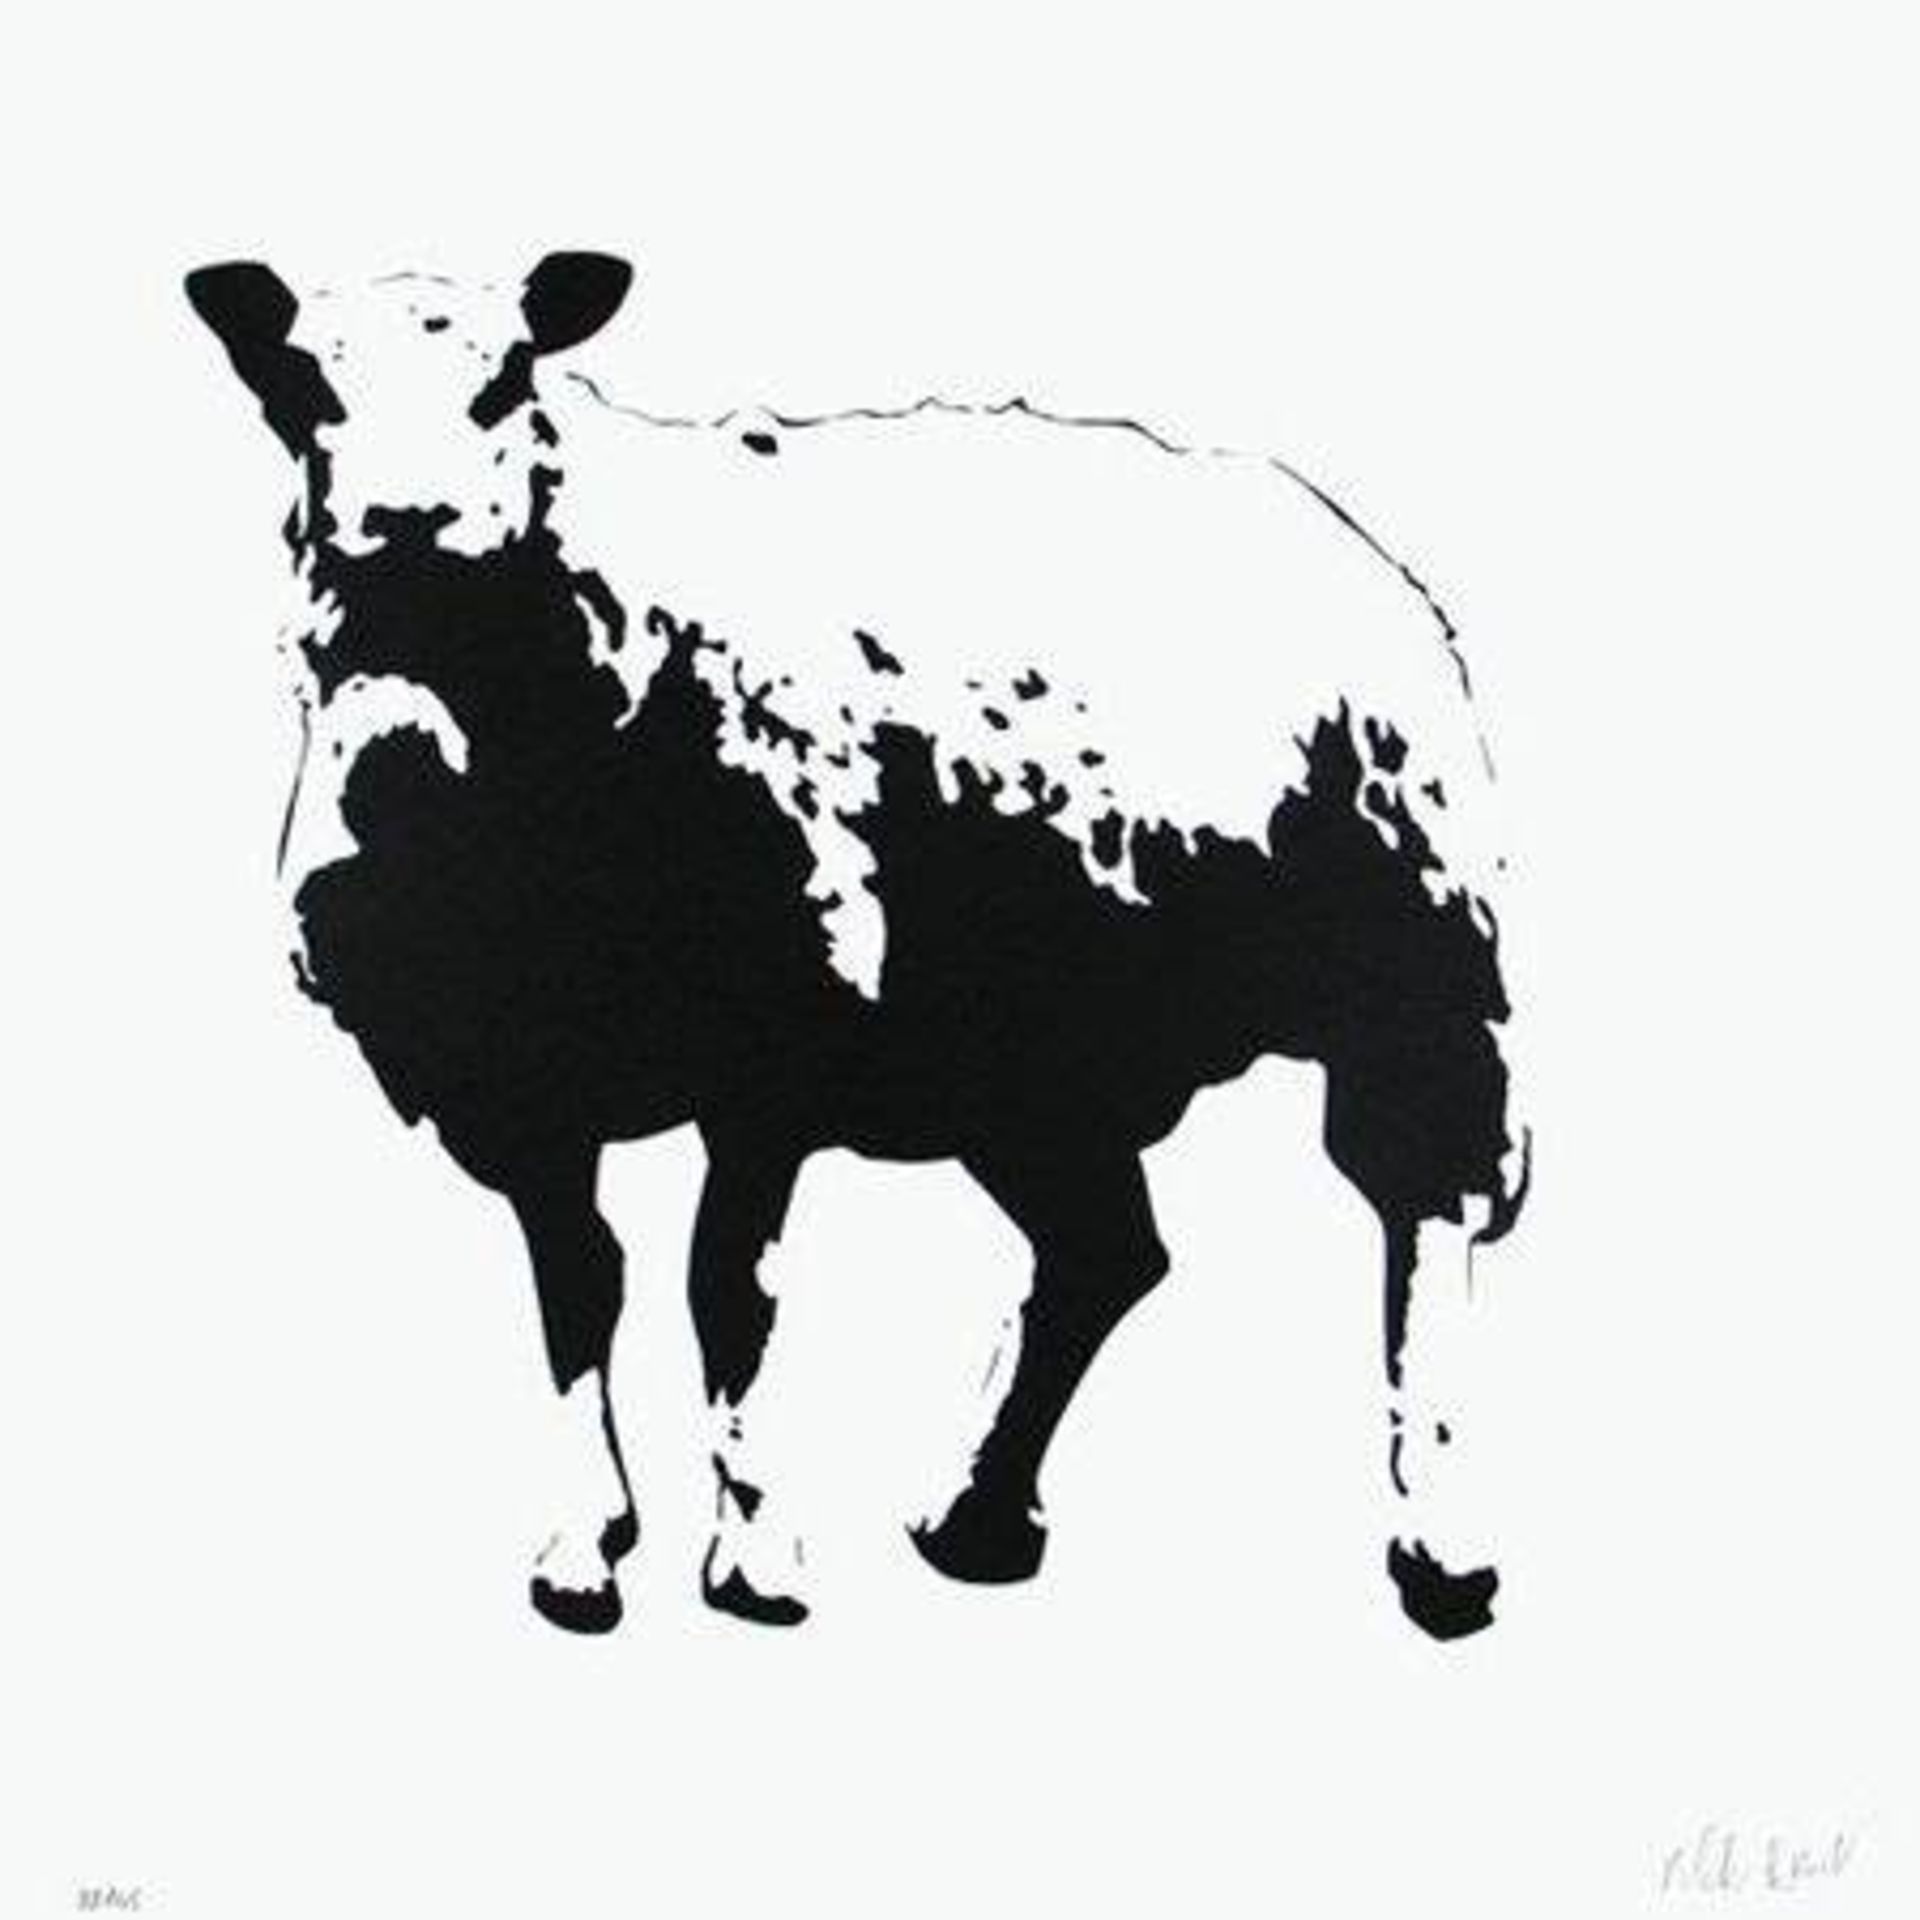 Blek le Rat (b.1952)'The Man Who Walks Through Walls' Special Limited Edition (SP) C-type Proof 1... - Image 11 of 11